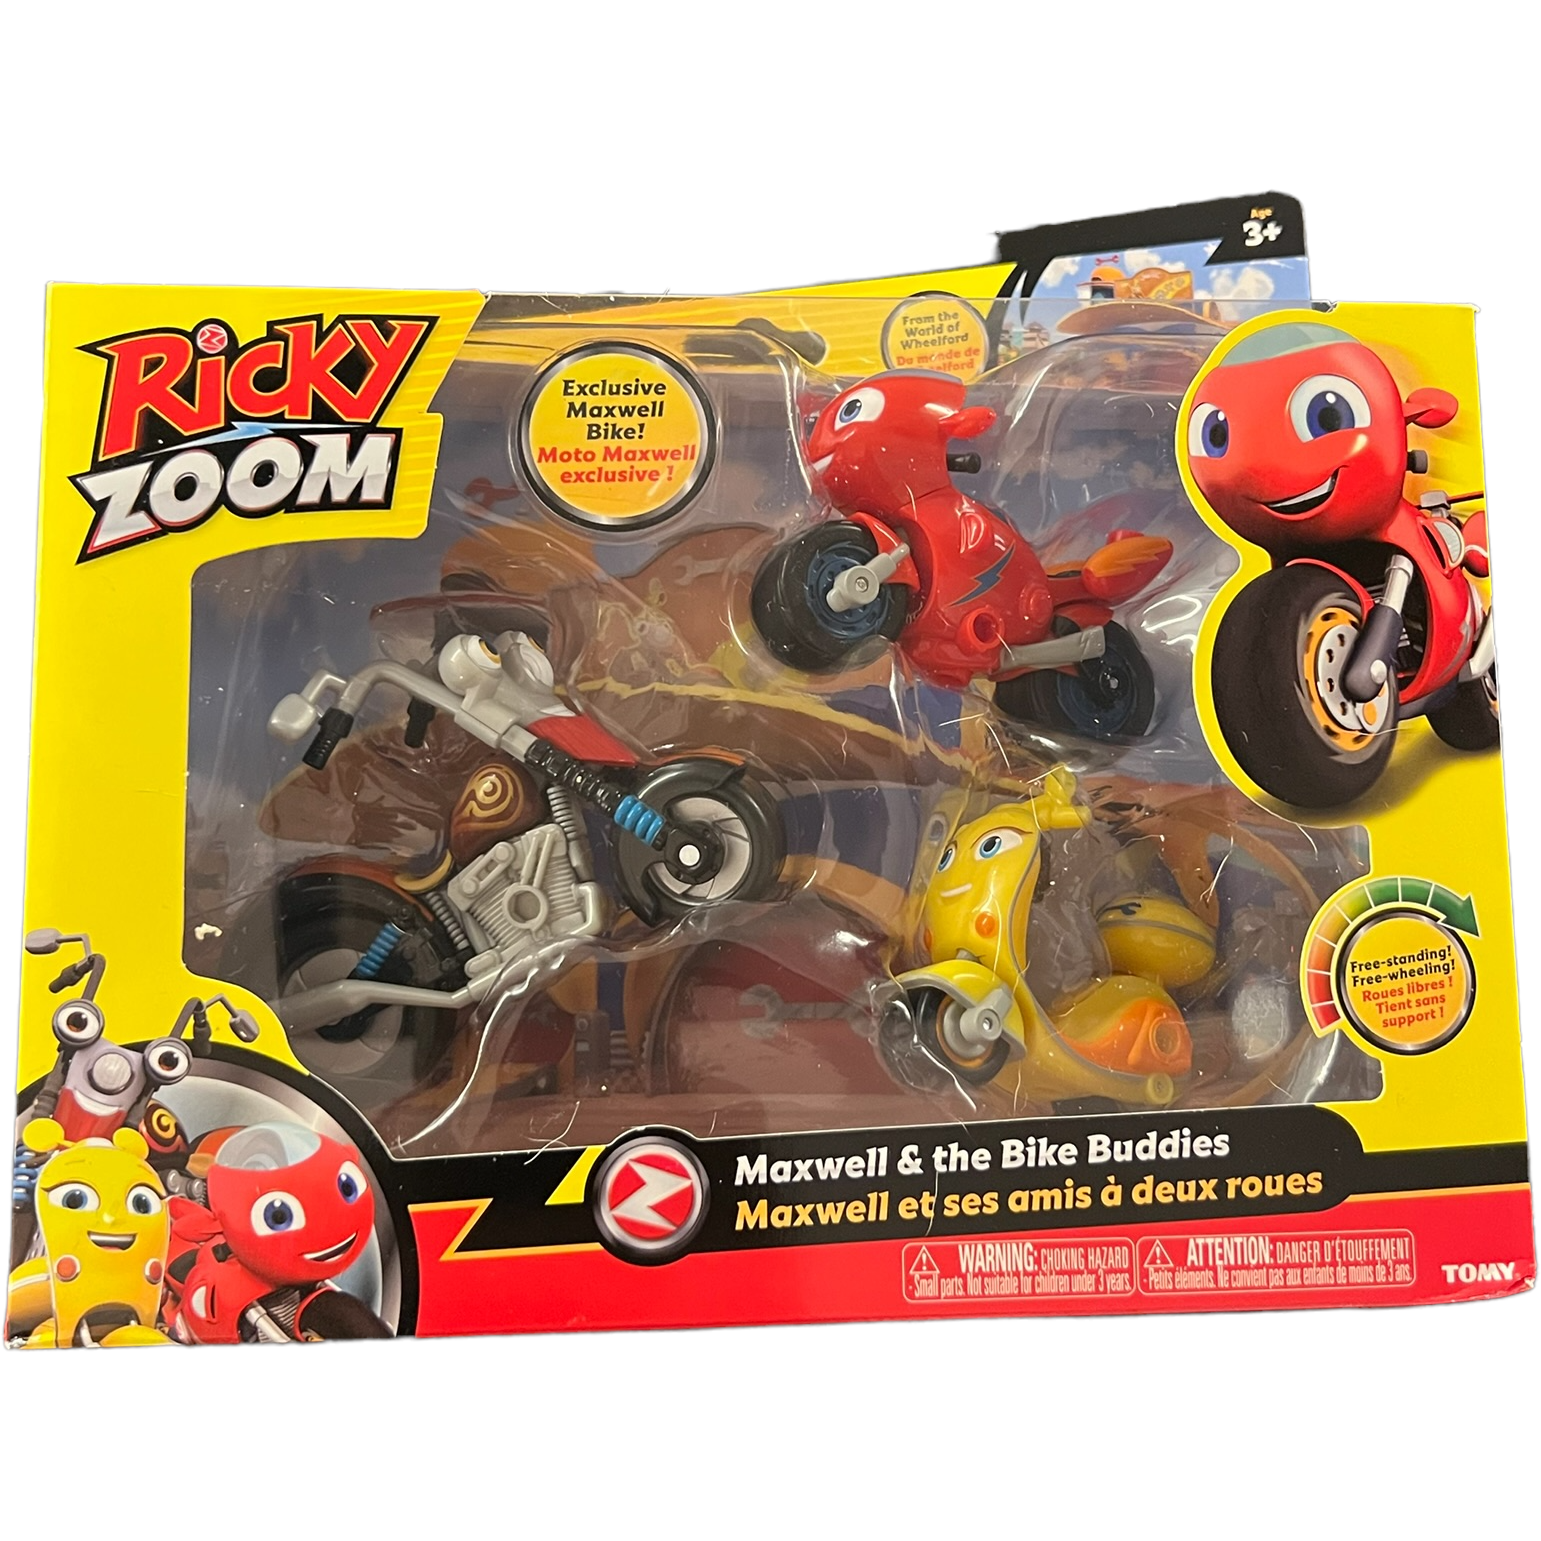 Go on Adventures in Wheelford with TOMY's Ricky Zoom Toys - The